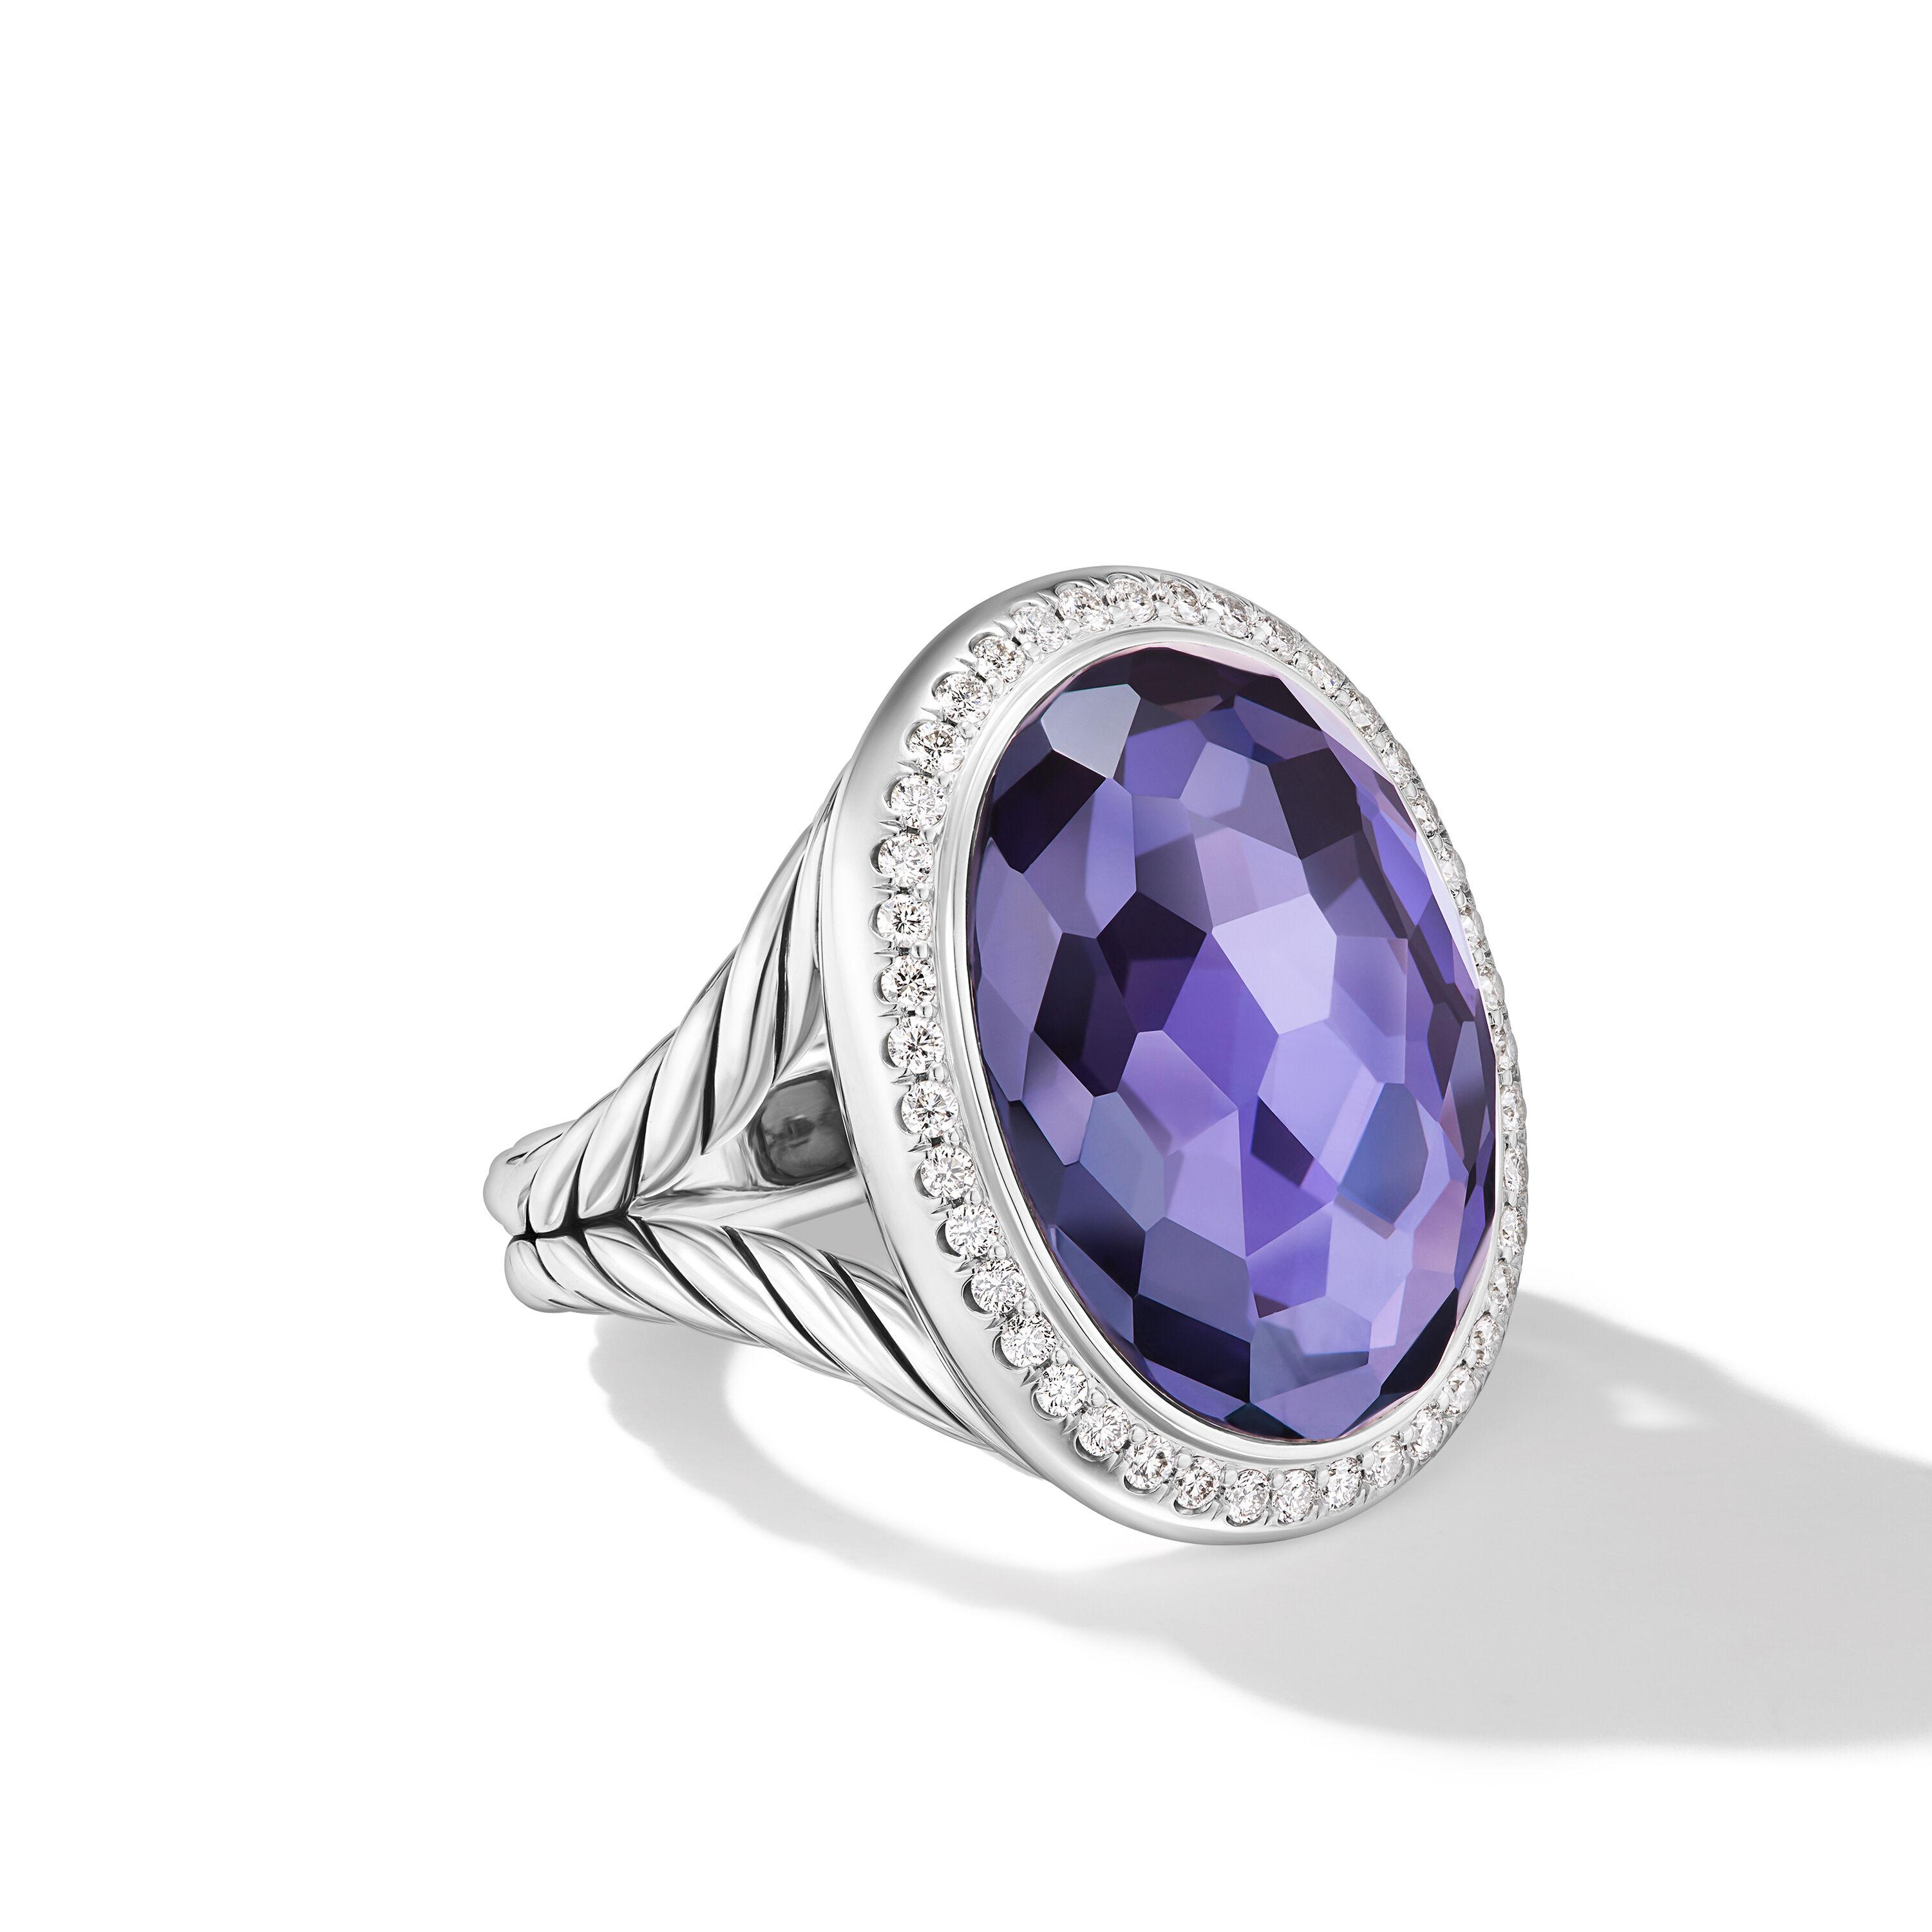 David Yurman Albion Oval Ring in Sterling Silver with Black Orchid and Diamonds